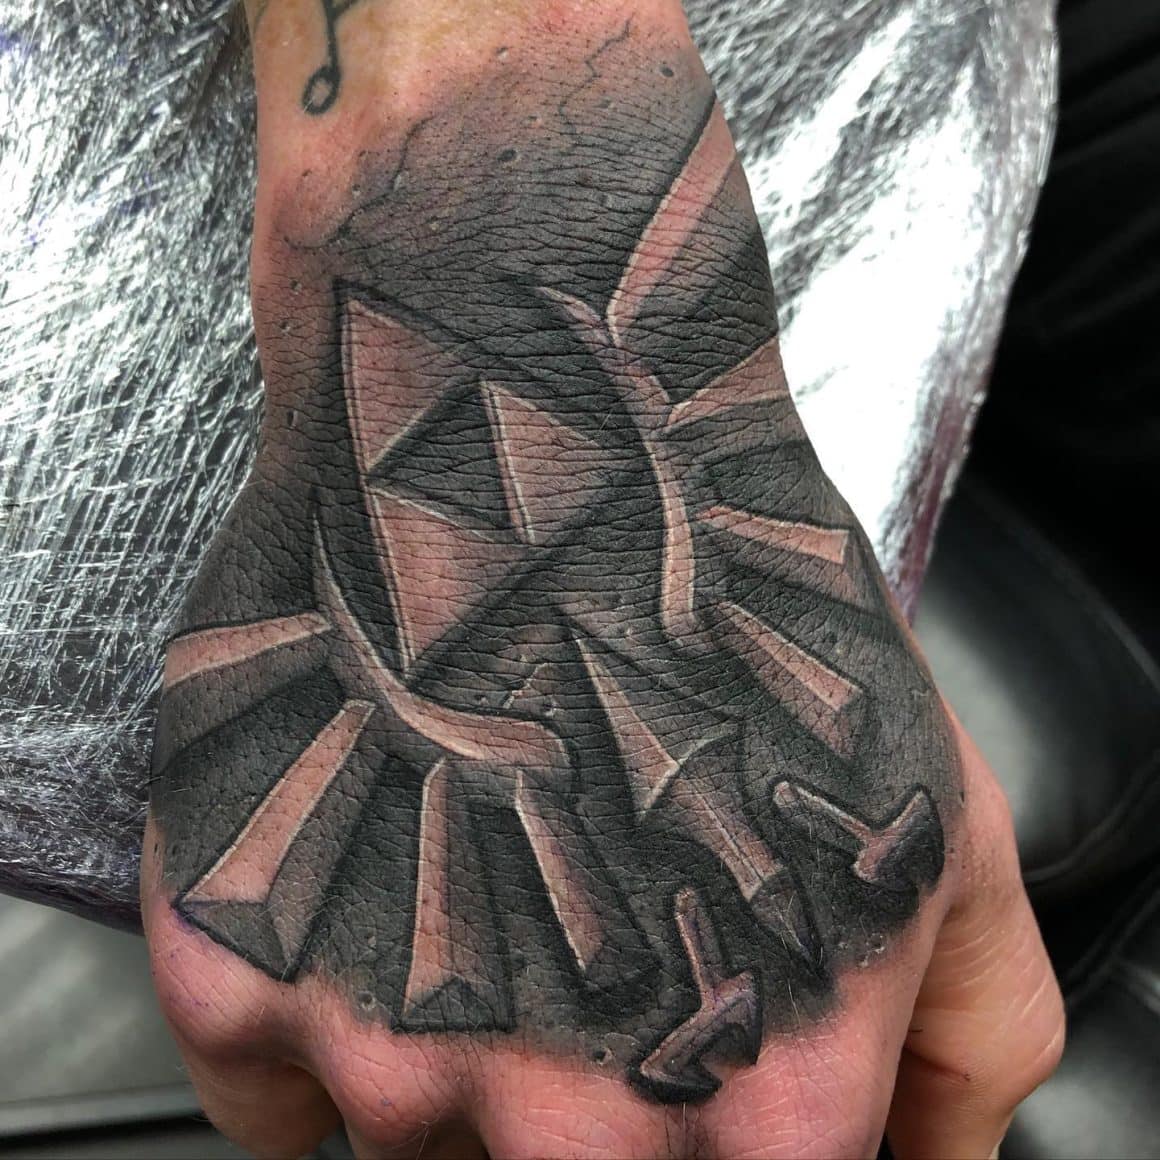 Zelda Tattoos: A Journey Through Art and Gaming